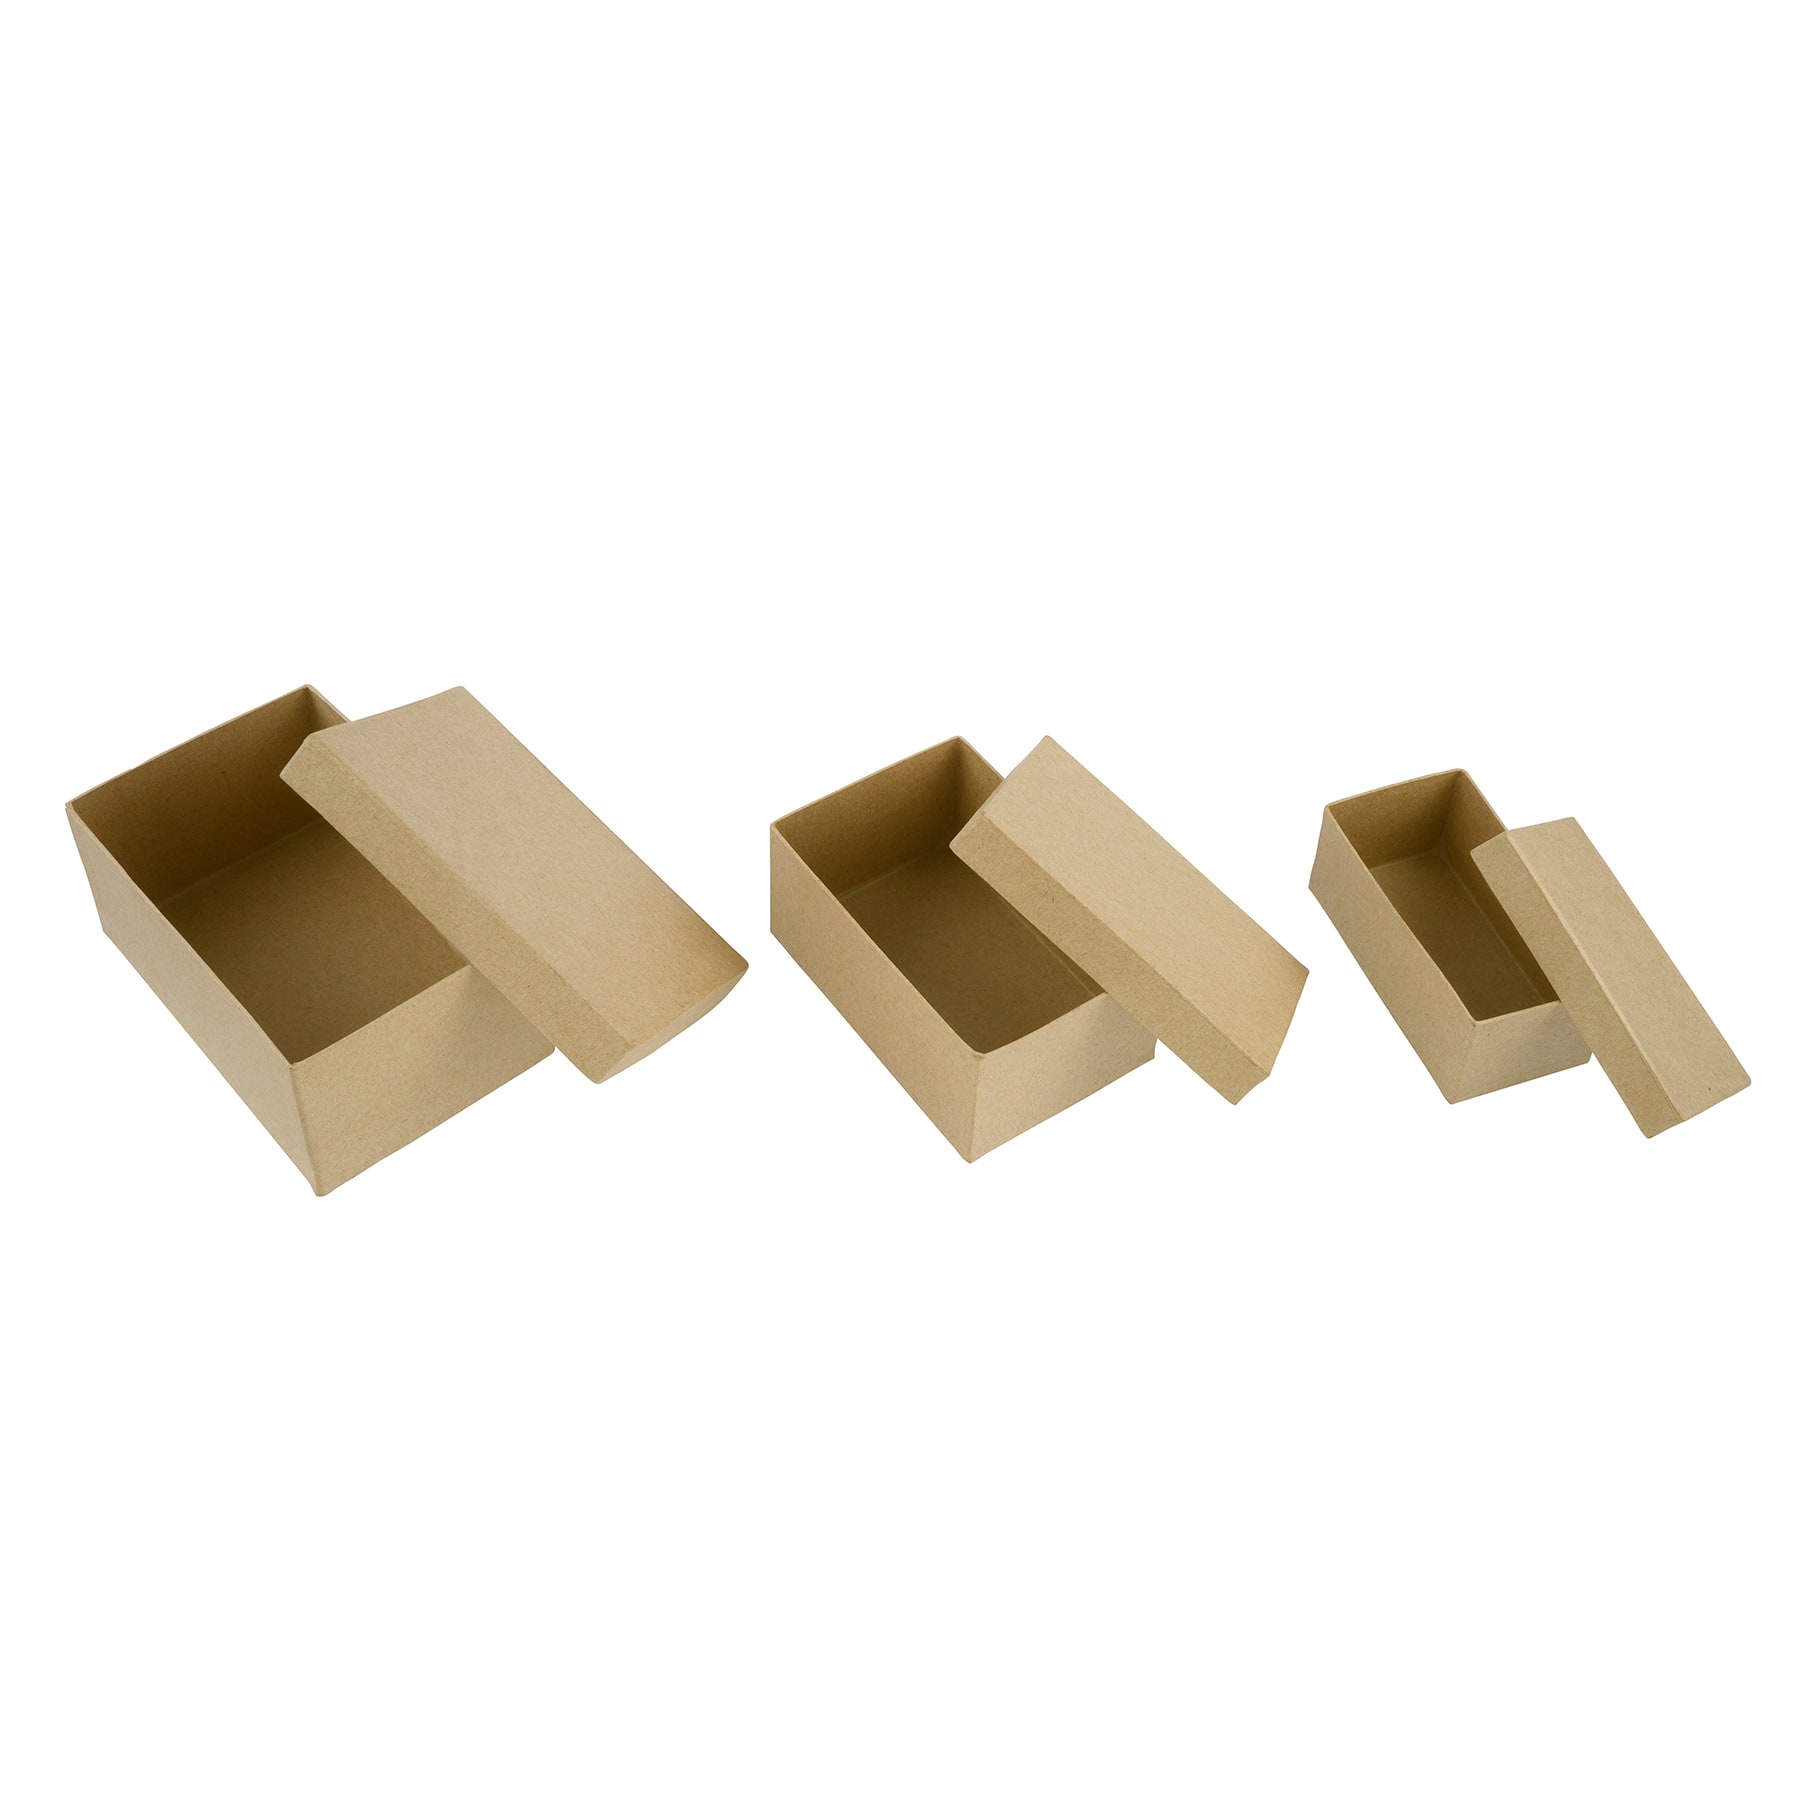 Set of 3 Premade Paper Mache Star Shaped Boxes by Factory Direct Craft -  Nested Star Cardboard Papier Mache Boxes Ready to Paint and Decorate  (Sizes